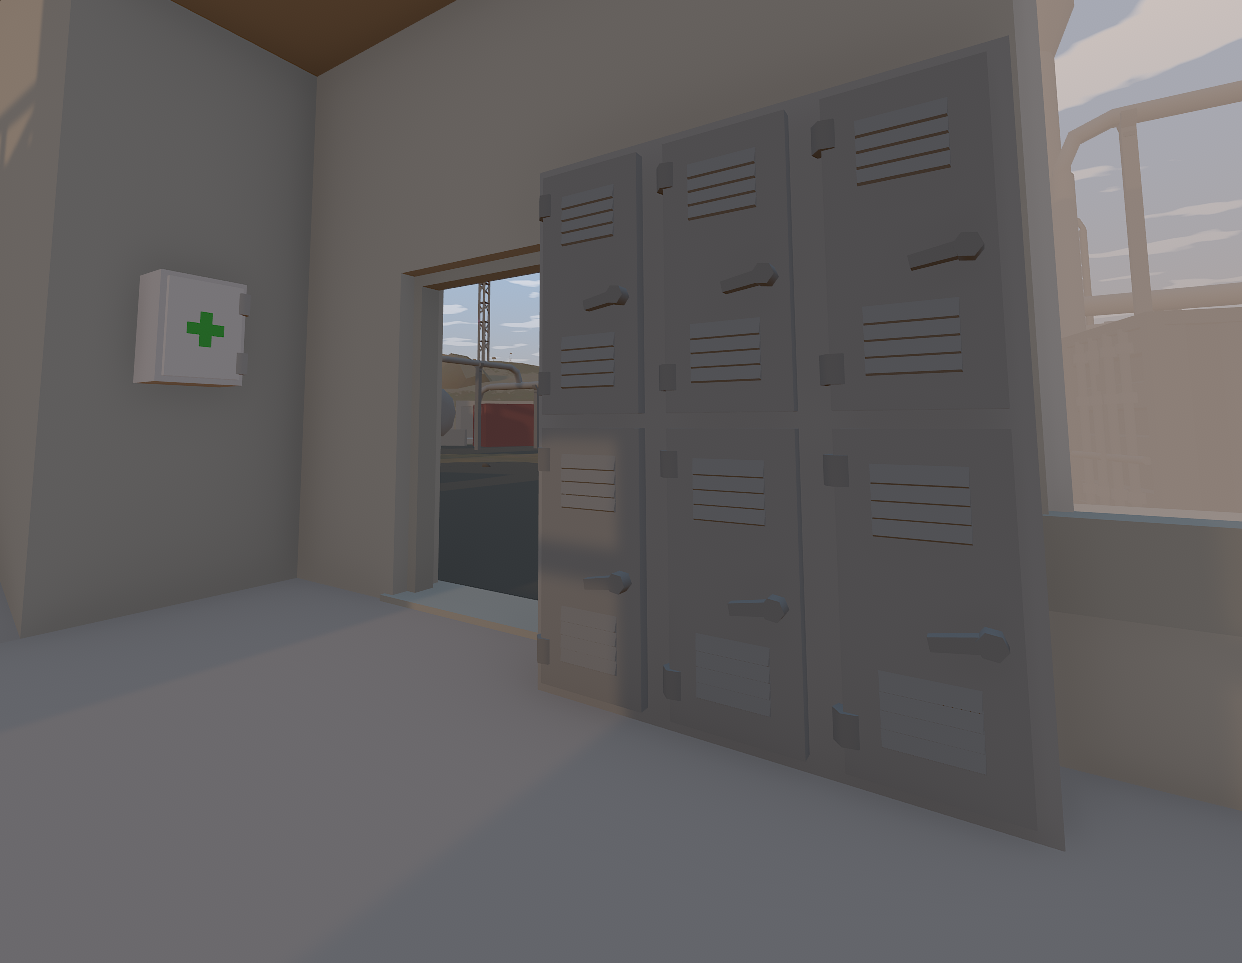 Unturned - All dropper items on Arid 2.0 - Fileboxes / Cabinets / Lockers - 0CC33C4